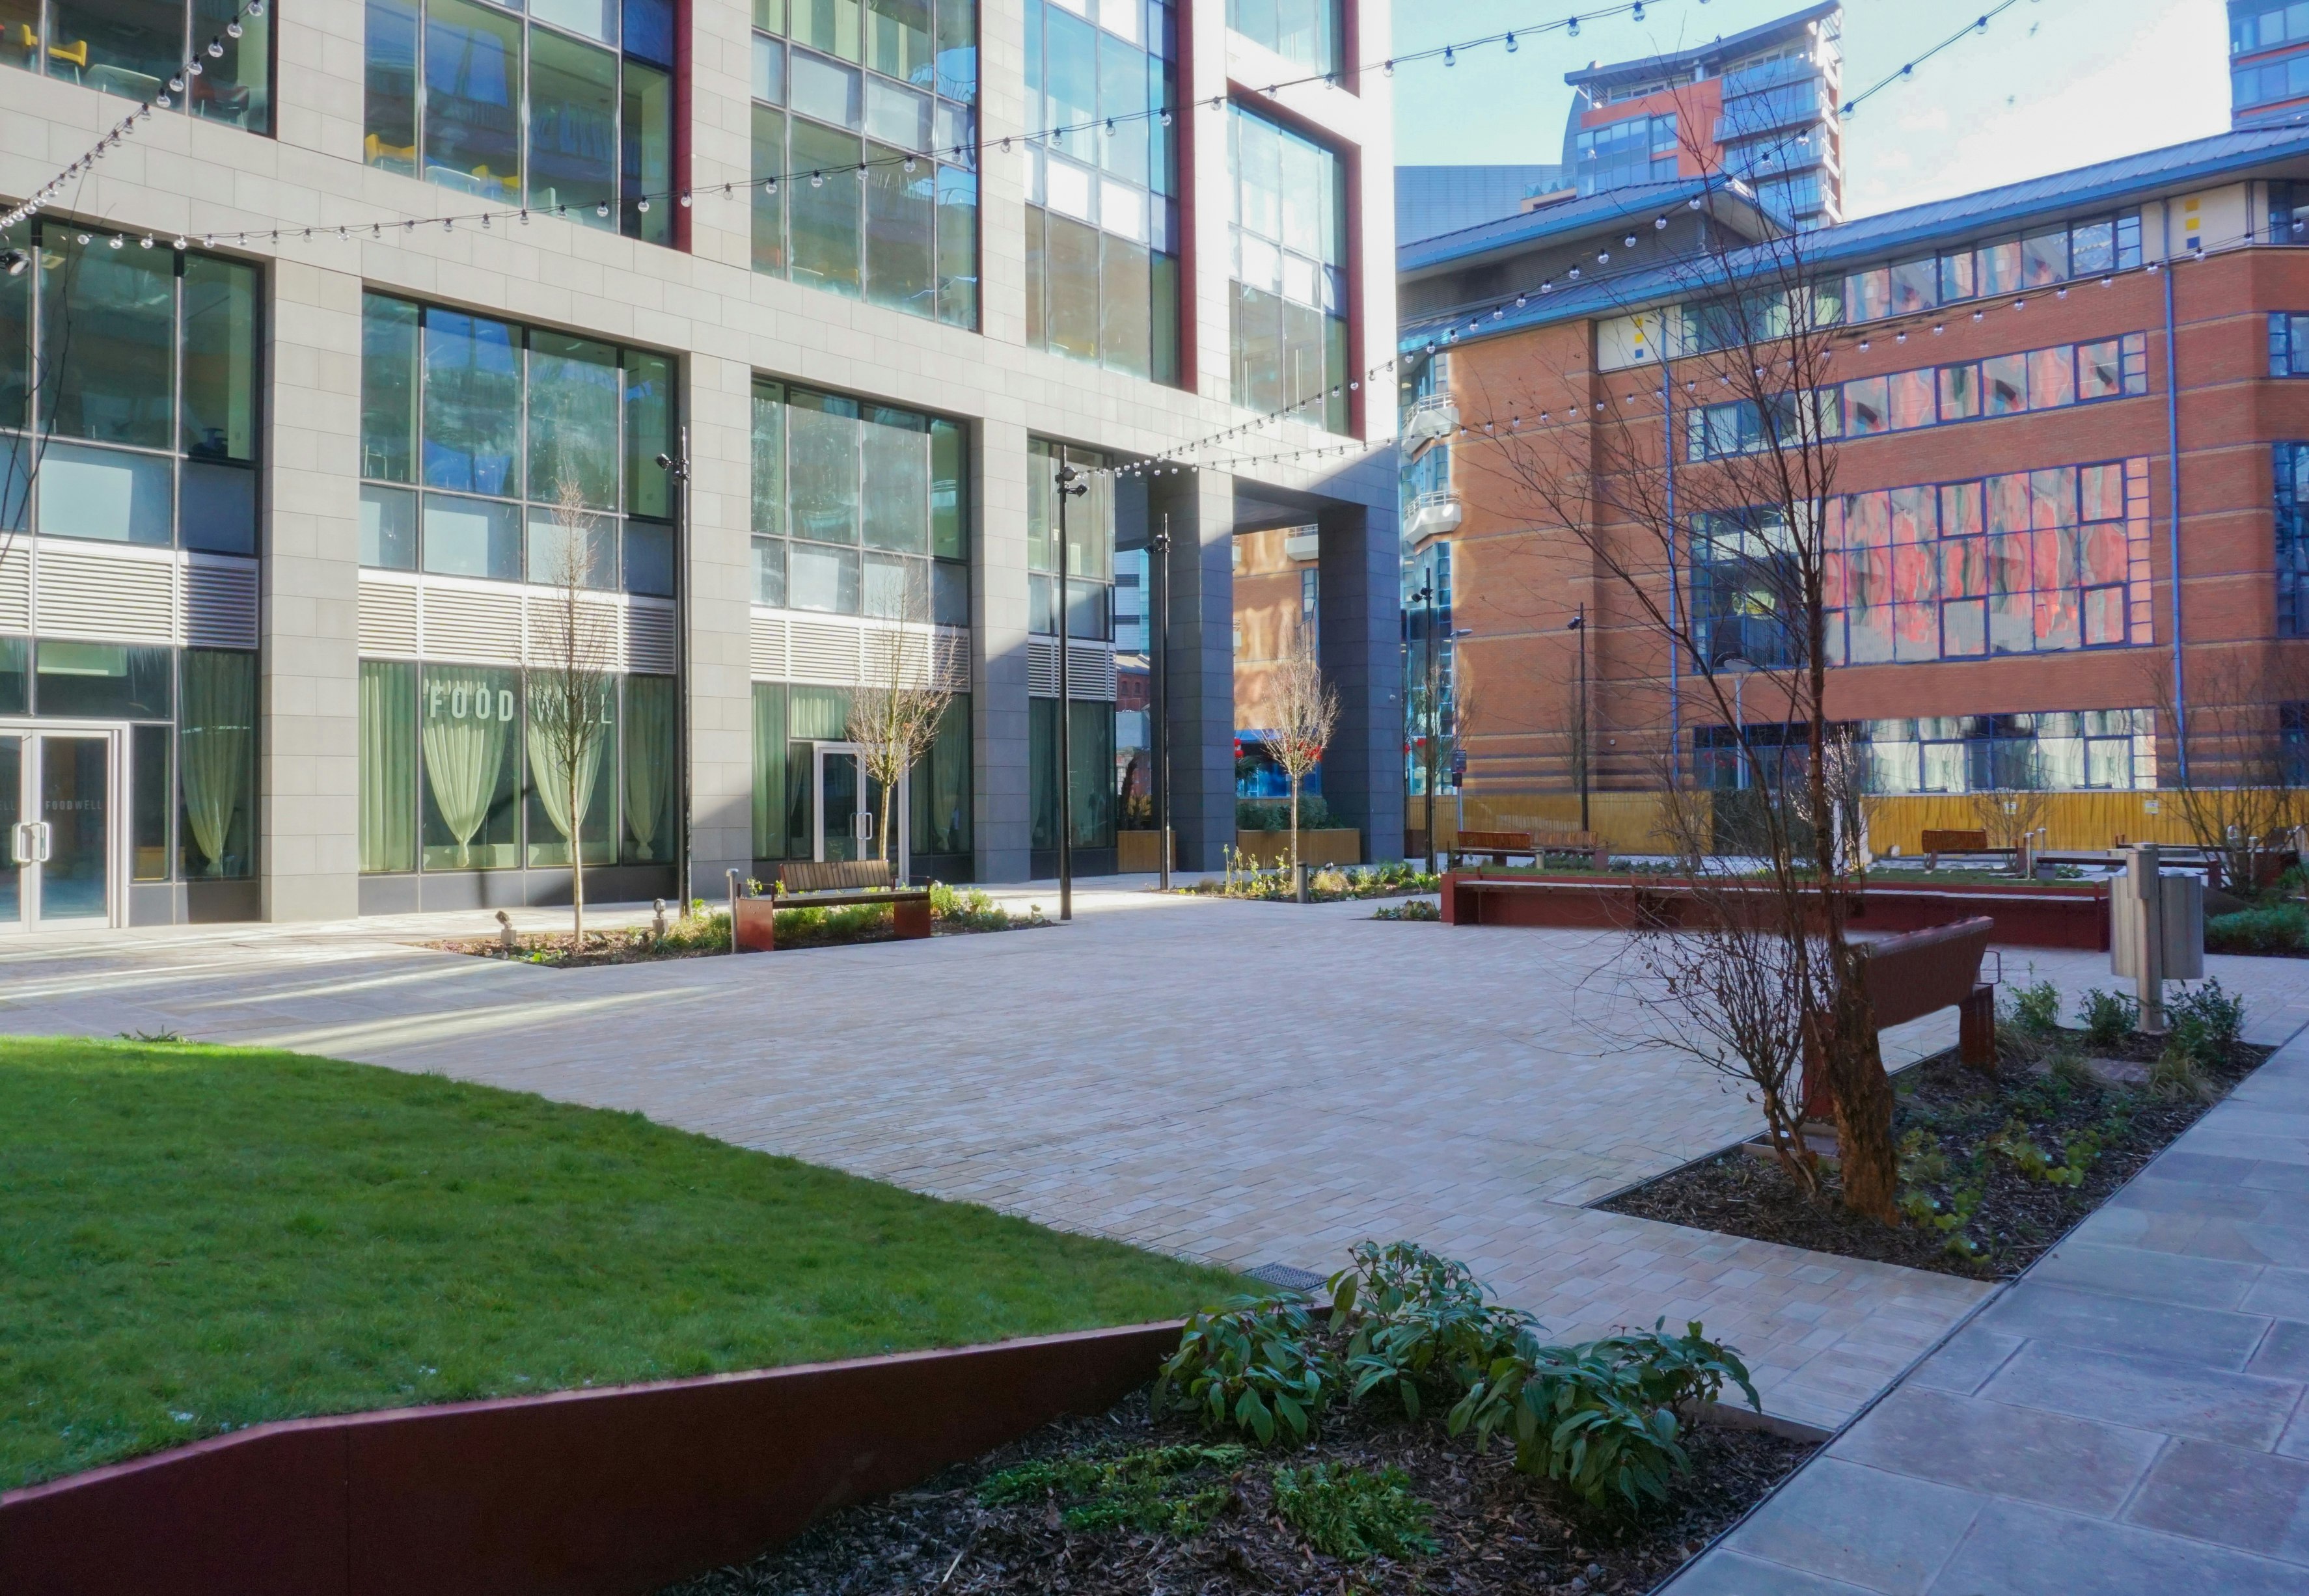 Pop Up Spaces Venues in Manchester - New Bailey Square